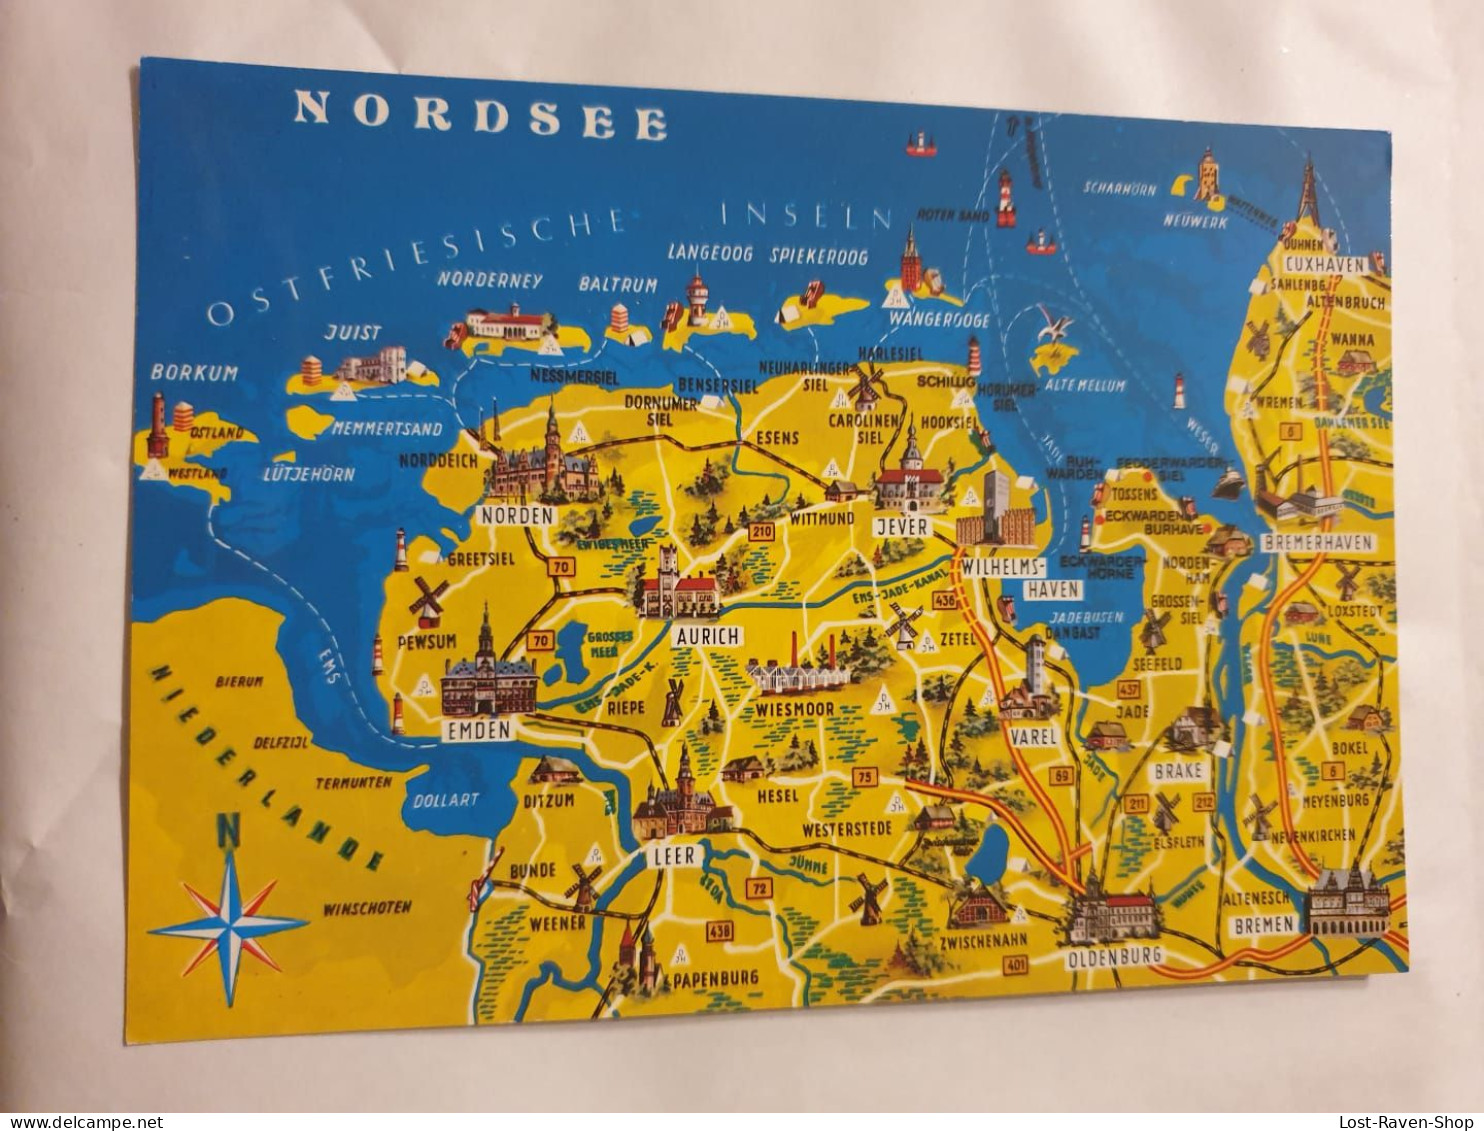 Nordsee - Maps